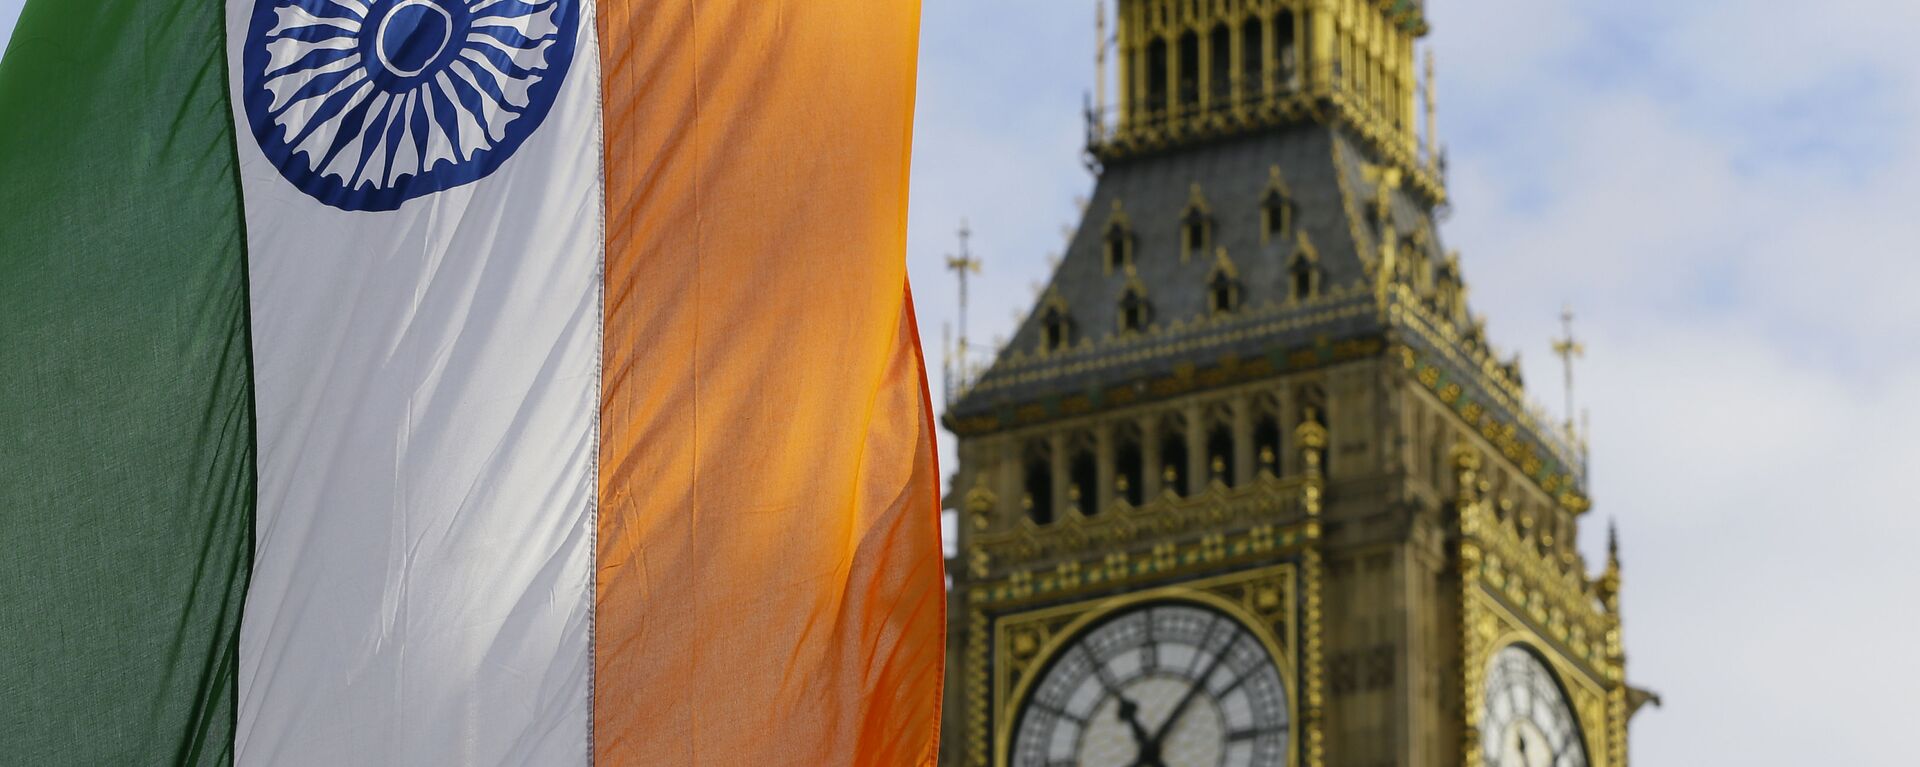 An Indian Flag hangs near the London landmark Big Ben in Parliament Square in London, Thursday, Nov. 12, 2015. Indian Prime Minister Narendra Modi is in Britain for a three day visit. - Sputnik International, 1920